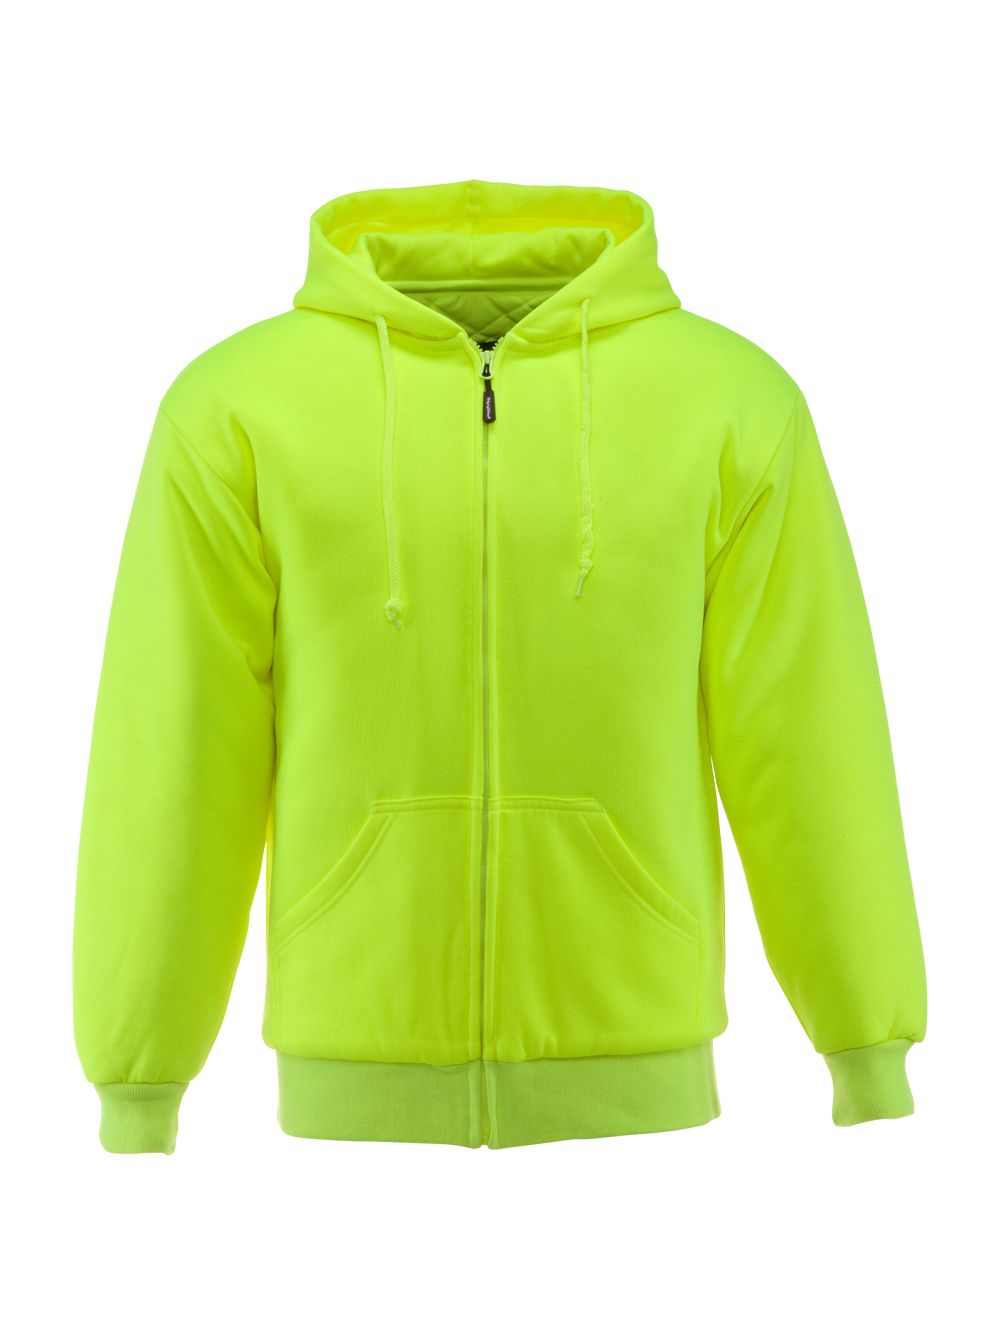 RefrigiWear HiVis Insulated Quilted Sweatshirt | Lime | Fit: Big & Tall | Ragg Wool/Polyester/Fabric | L